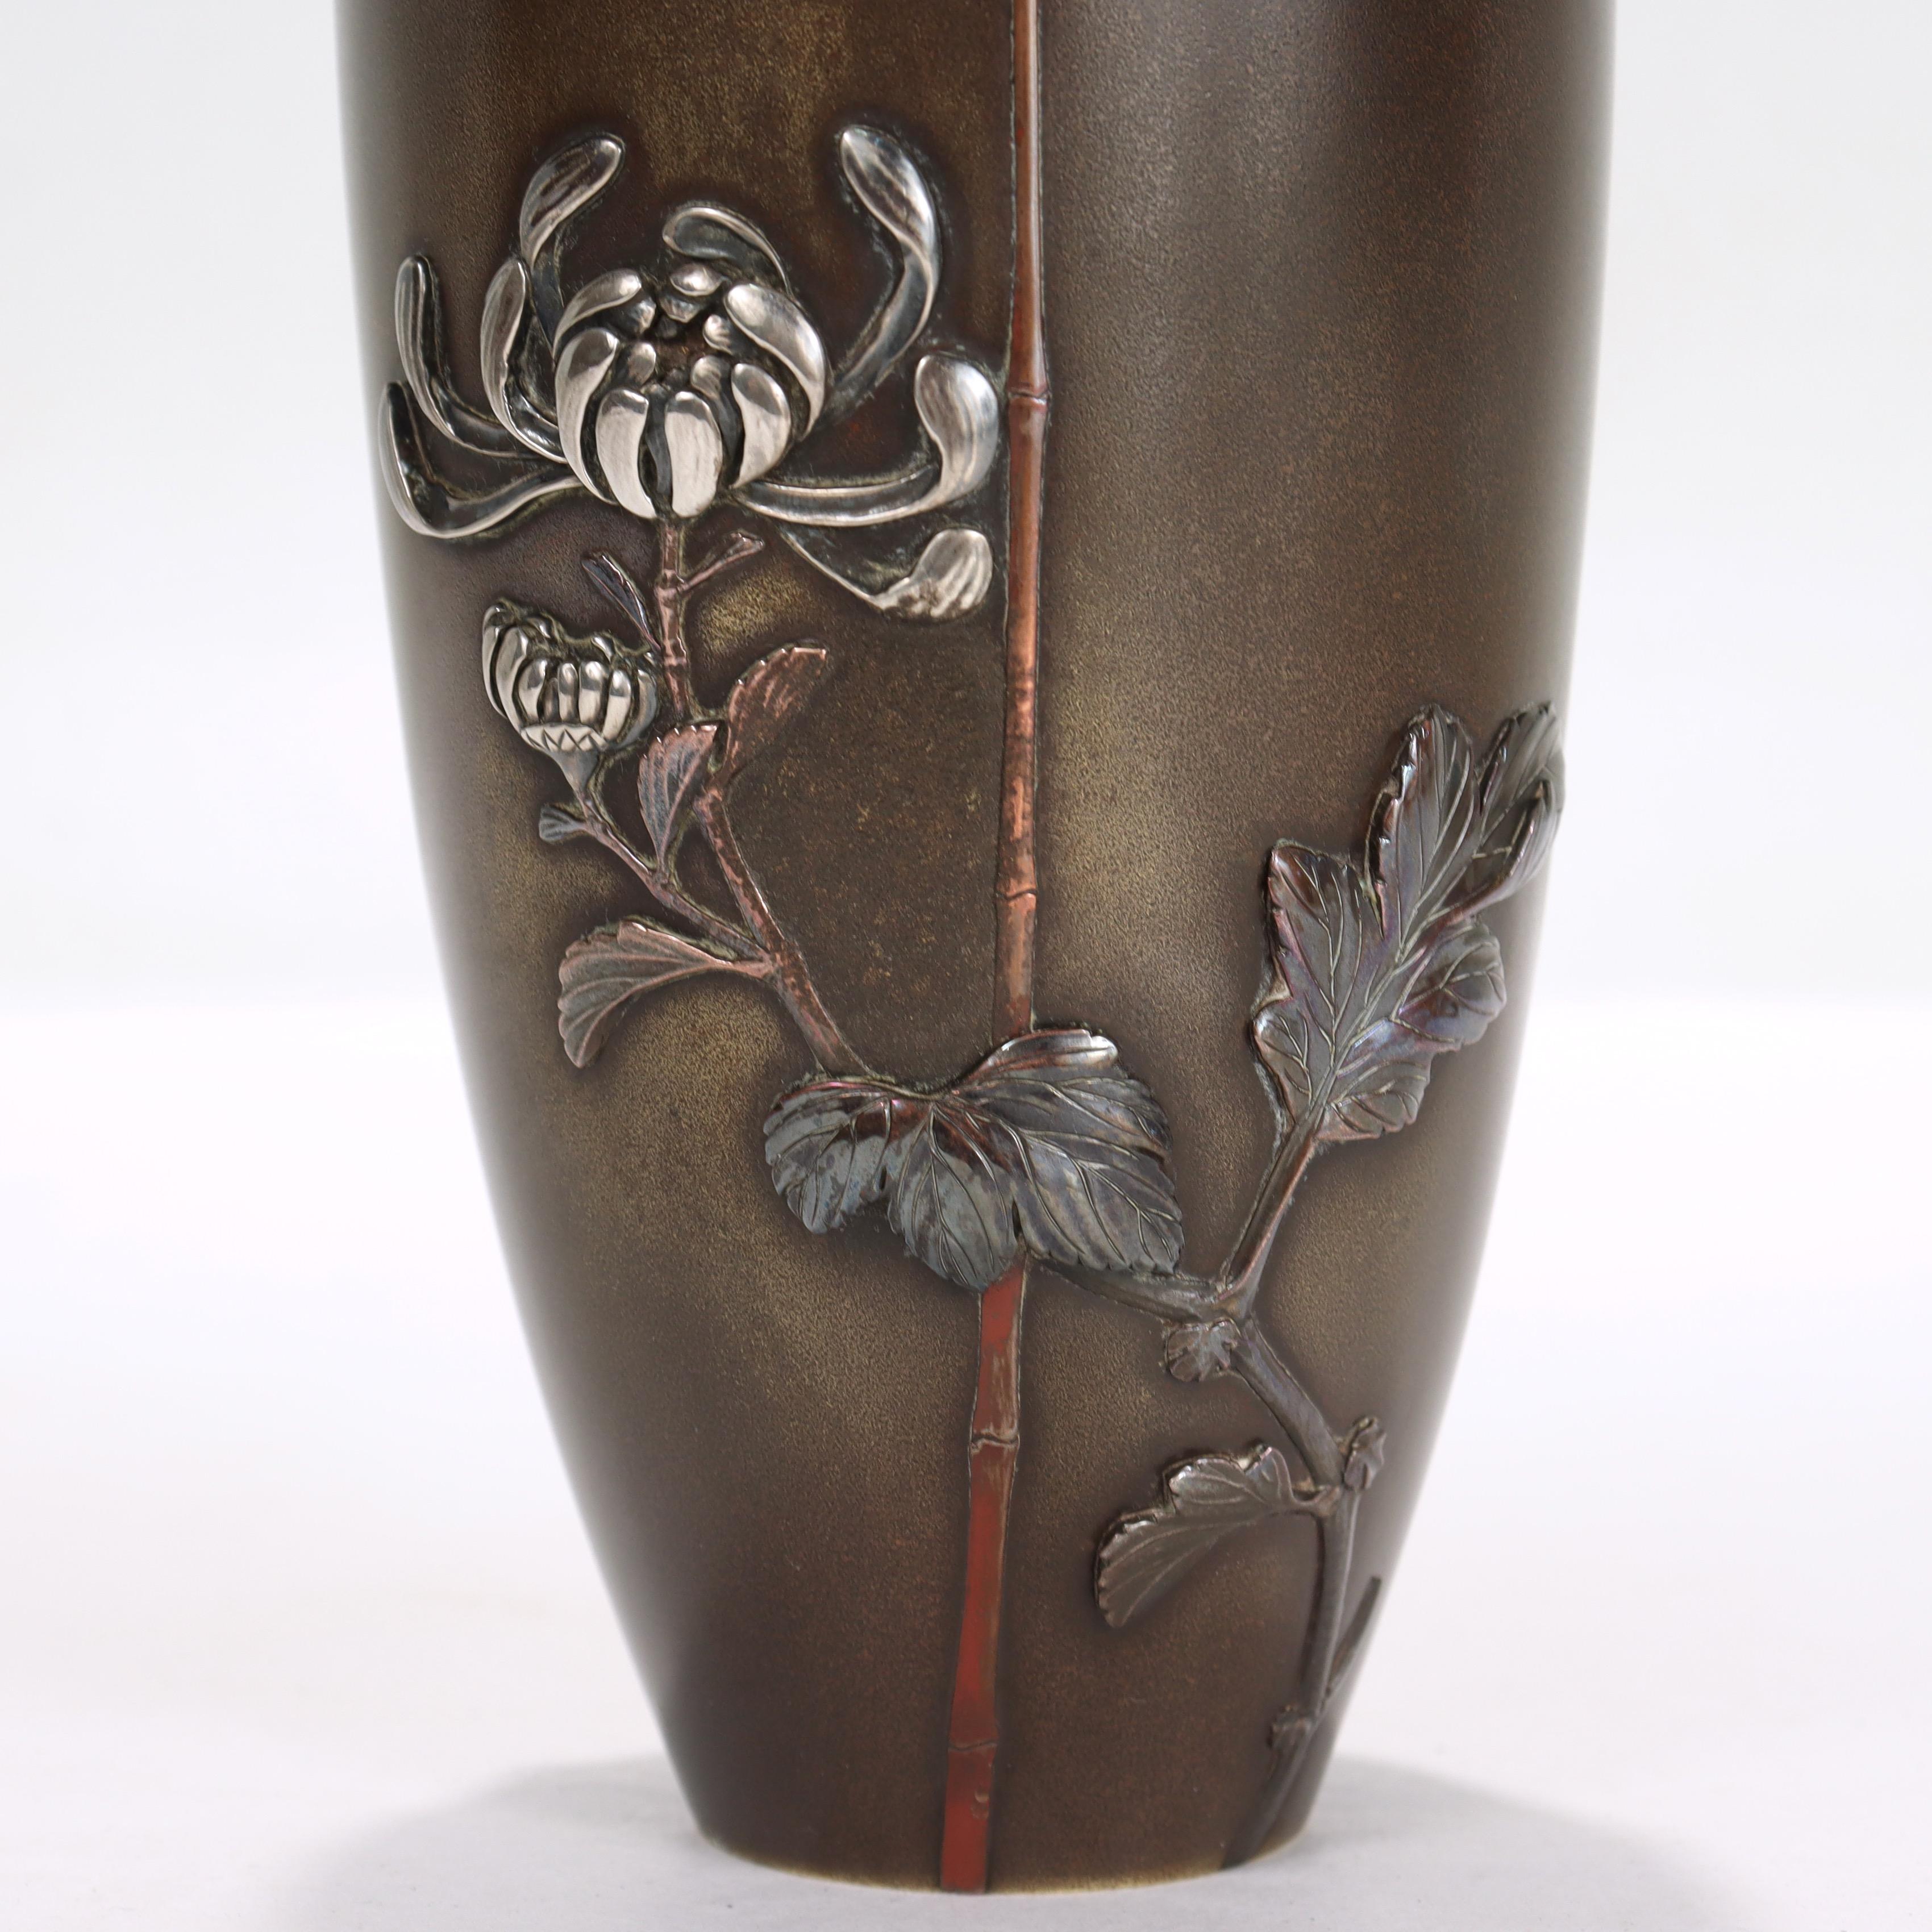 20th Century Antique Signed Japanese Bronze Mixed Metals Butterbur Vase by Atsuyoshi / Inoue For Sale